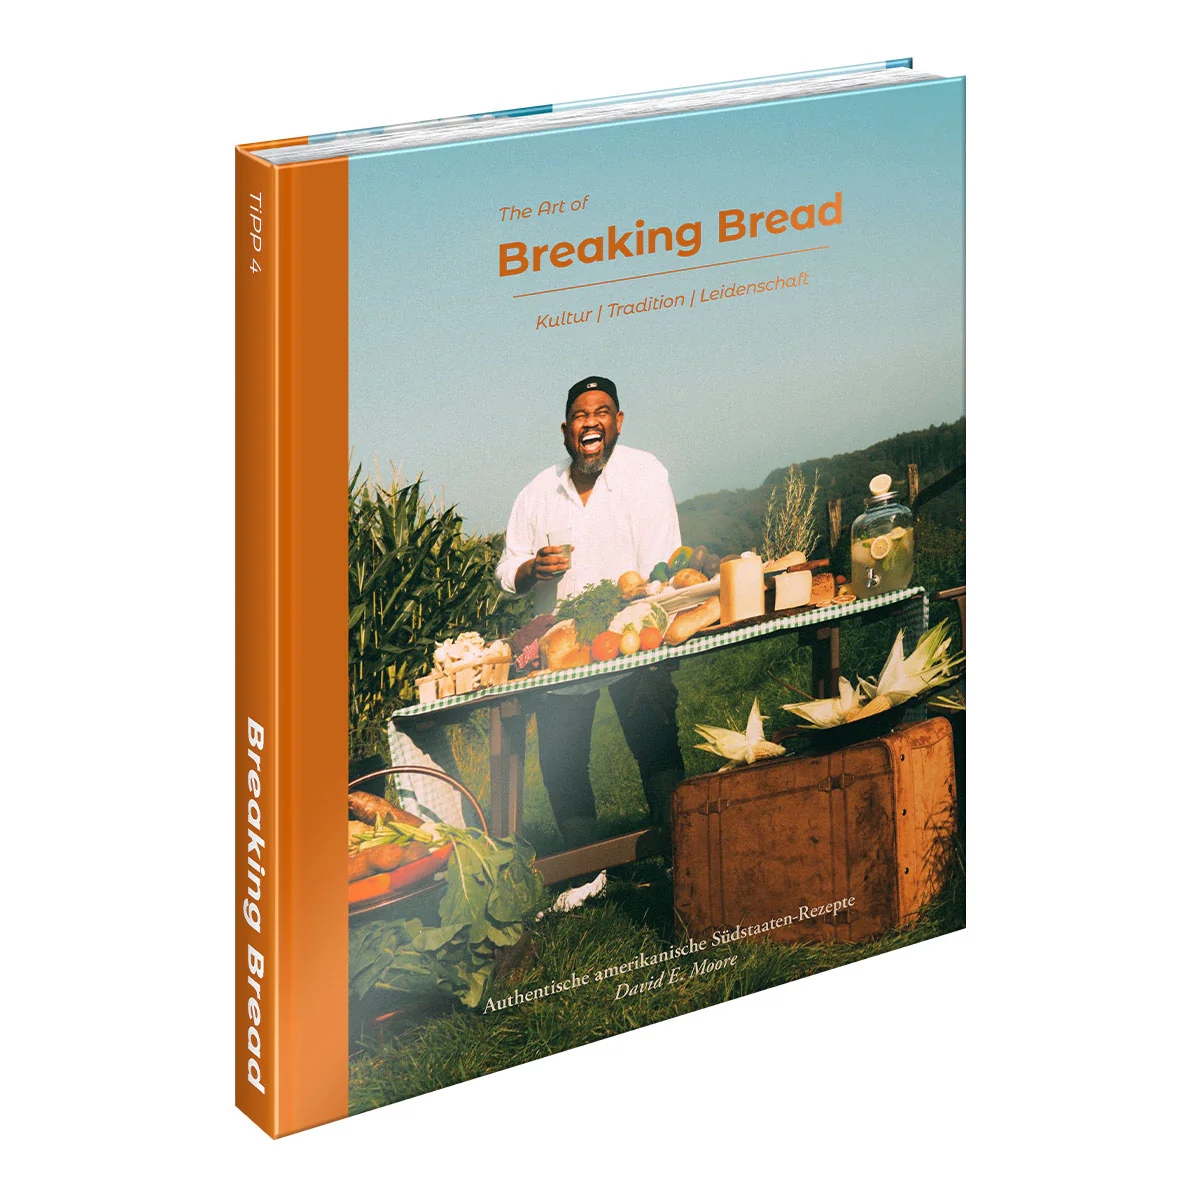 mockup of the cookbook The Art of Breaking Bread by David E. Moore